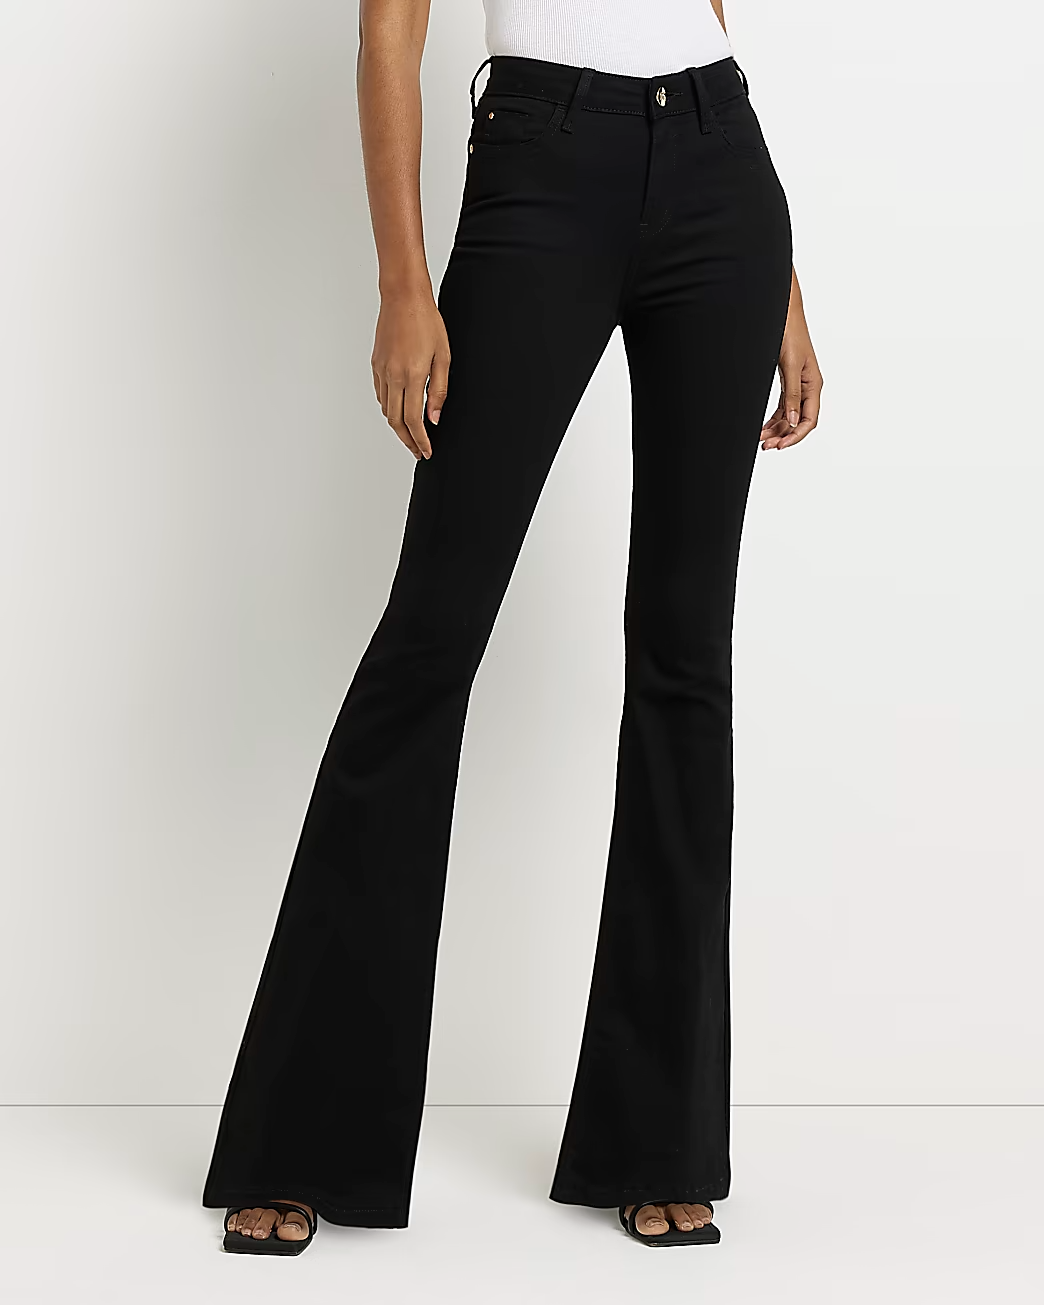 BLACK MID RISE FLARED JEANS